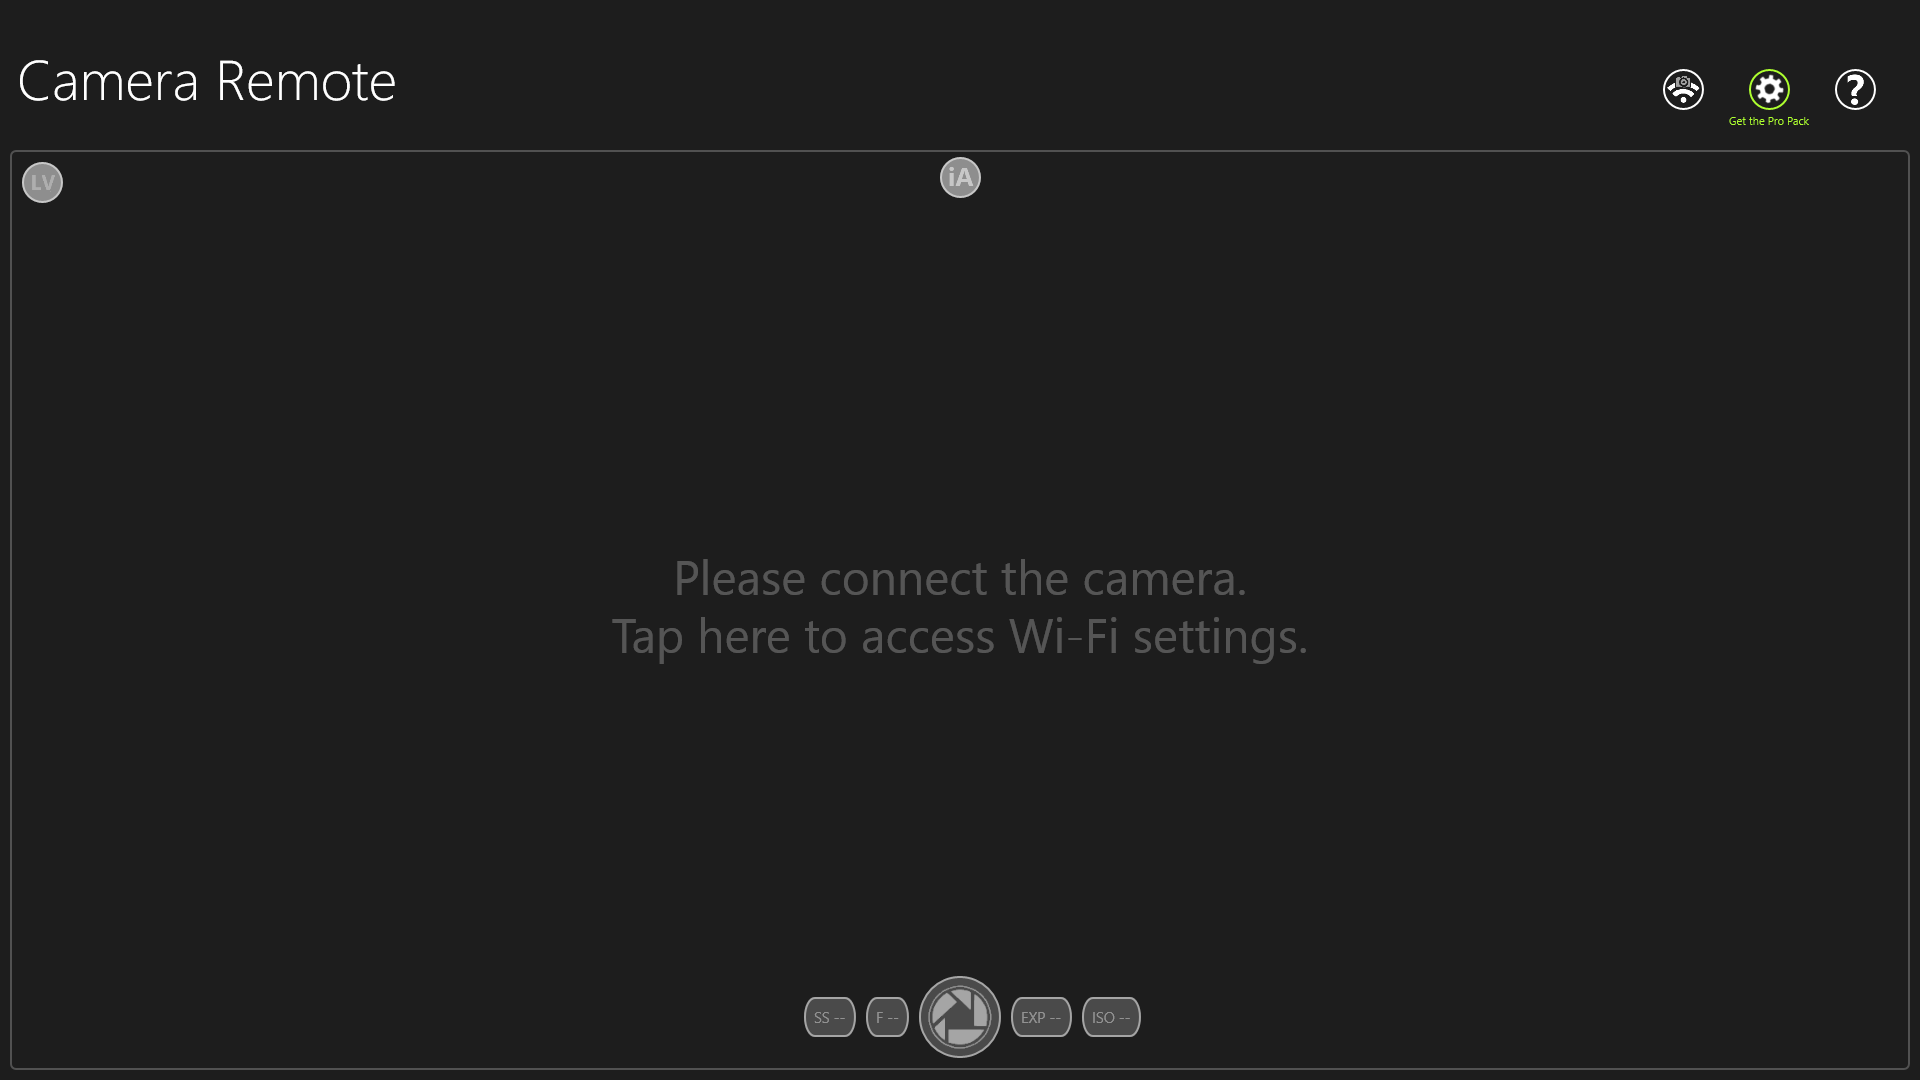 Connect the camera using the Wi-Fi settings on your device